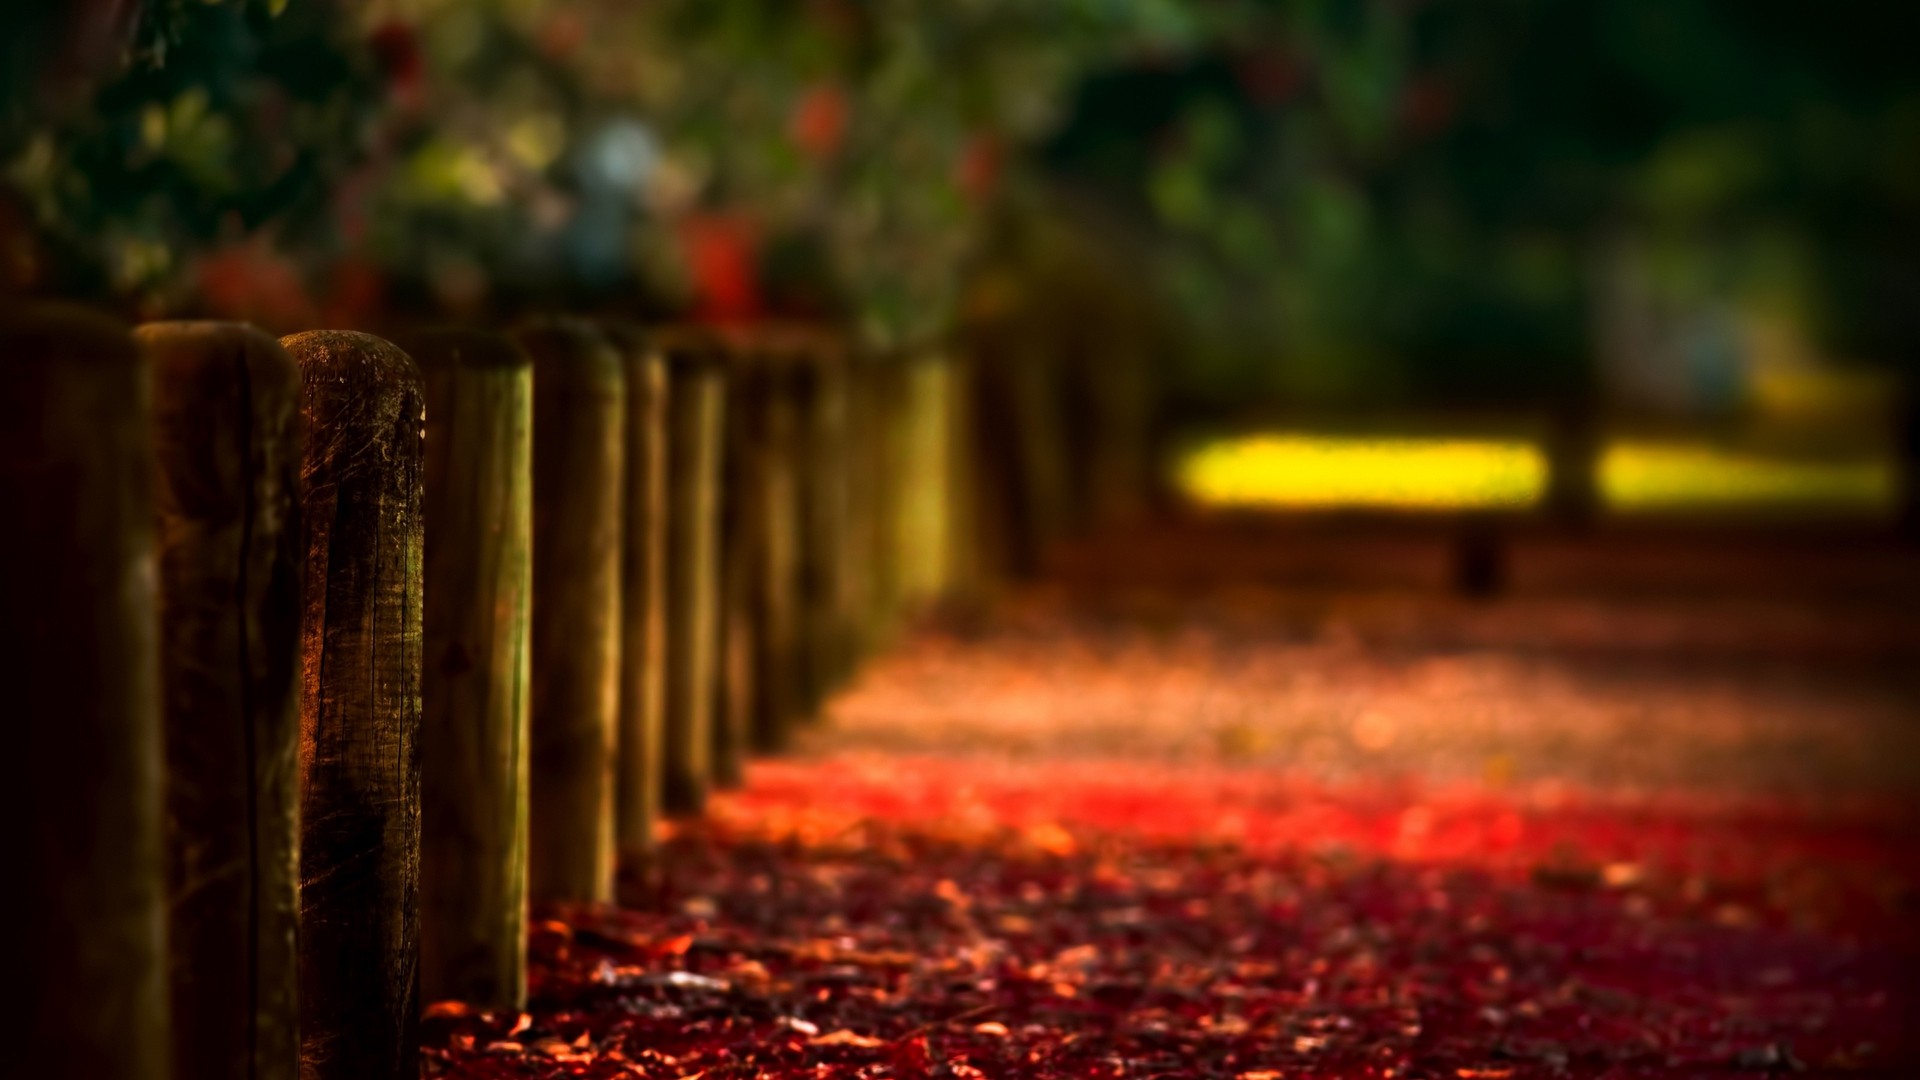 1920x1080 wallpapers: autumn, logs, stakes, fencing (image)